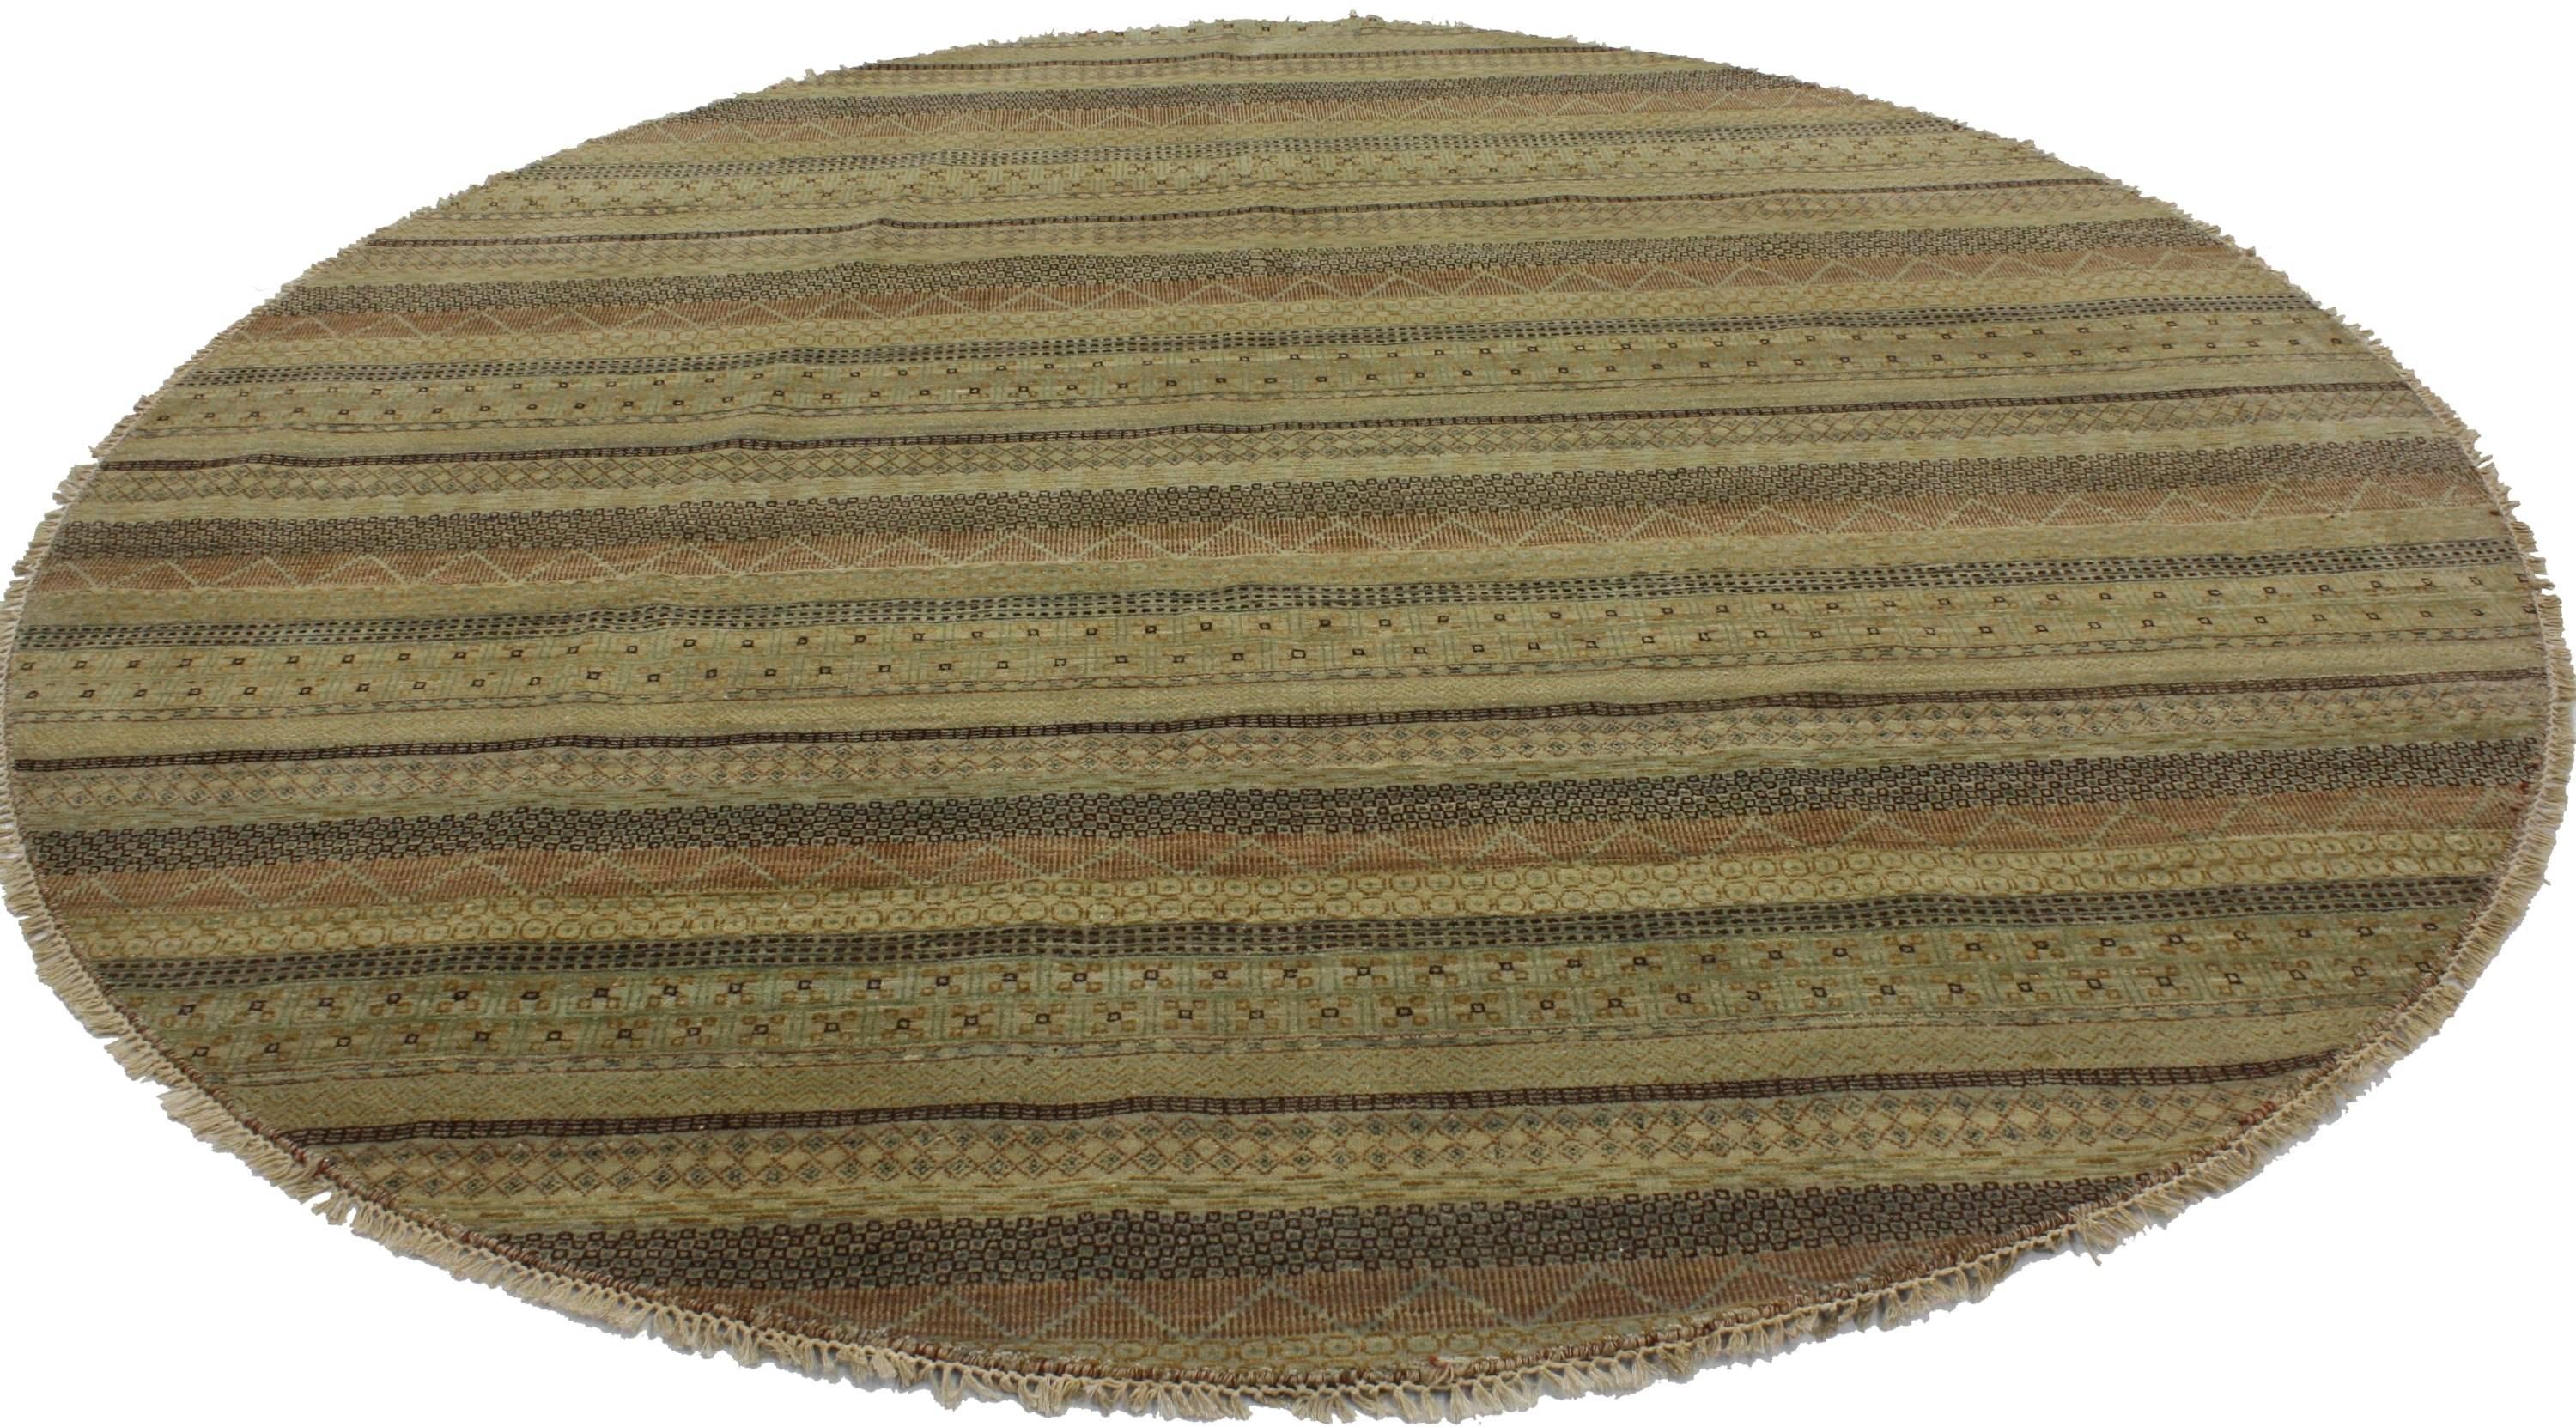 30293 New Transitional Round Rug With Stripes and Modern Style, 08'00 x 08'00. Traditional or modern, this richly textured transitional round rug with stripes will add depth and provide a burst of natural freshness to your space. Sporting a simple